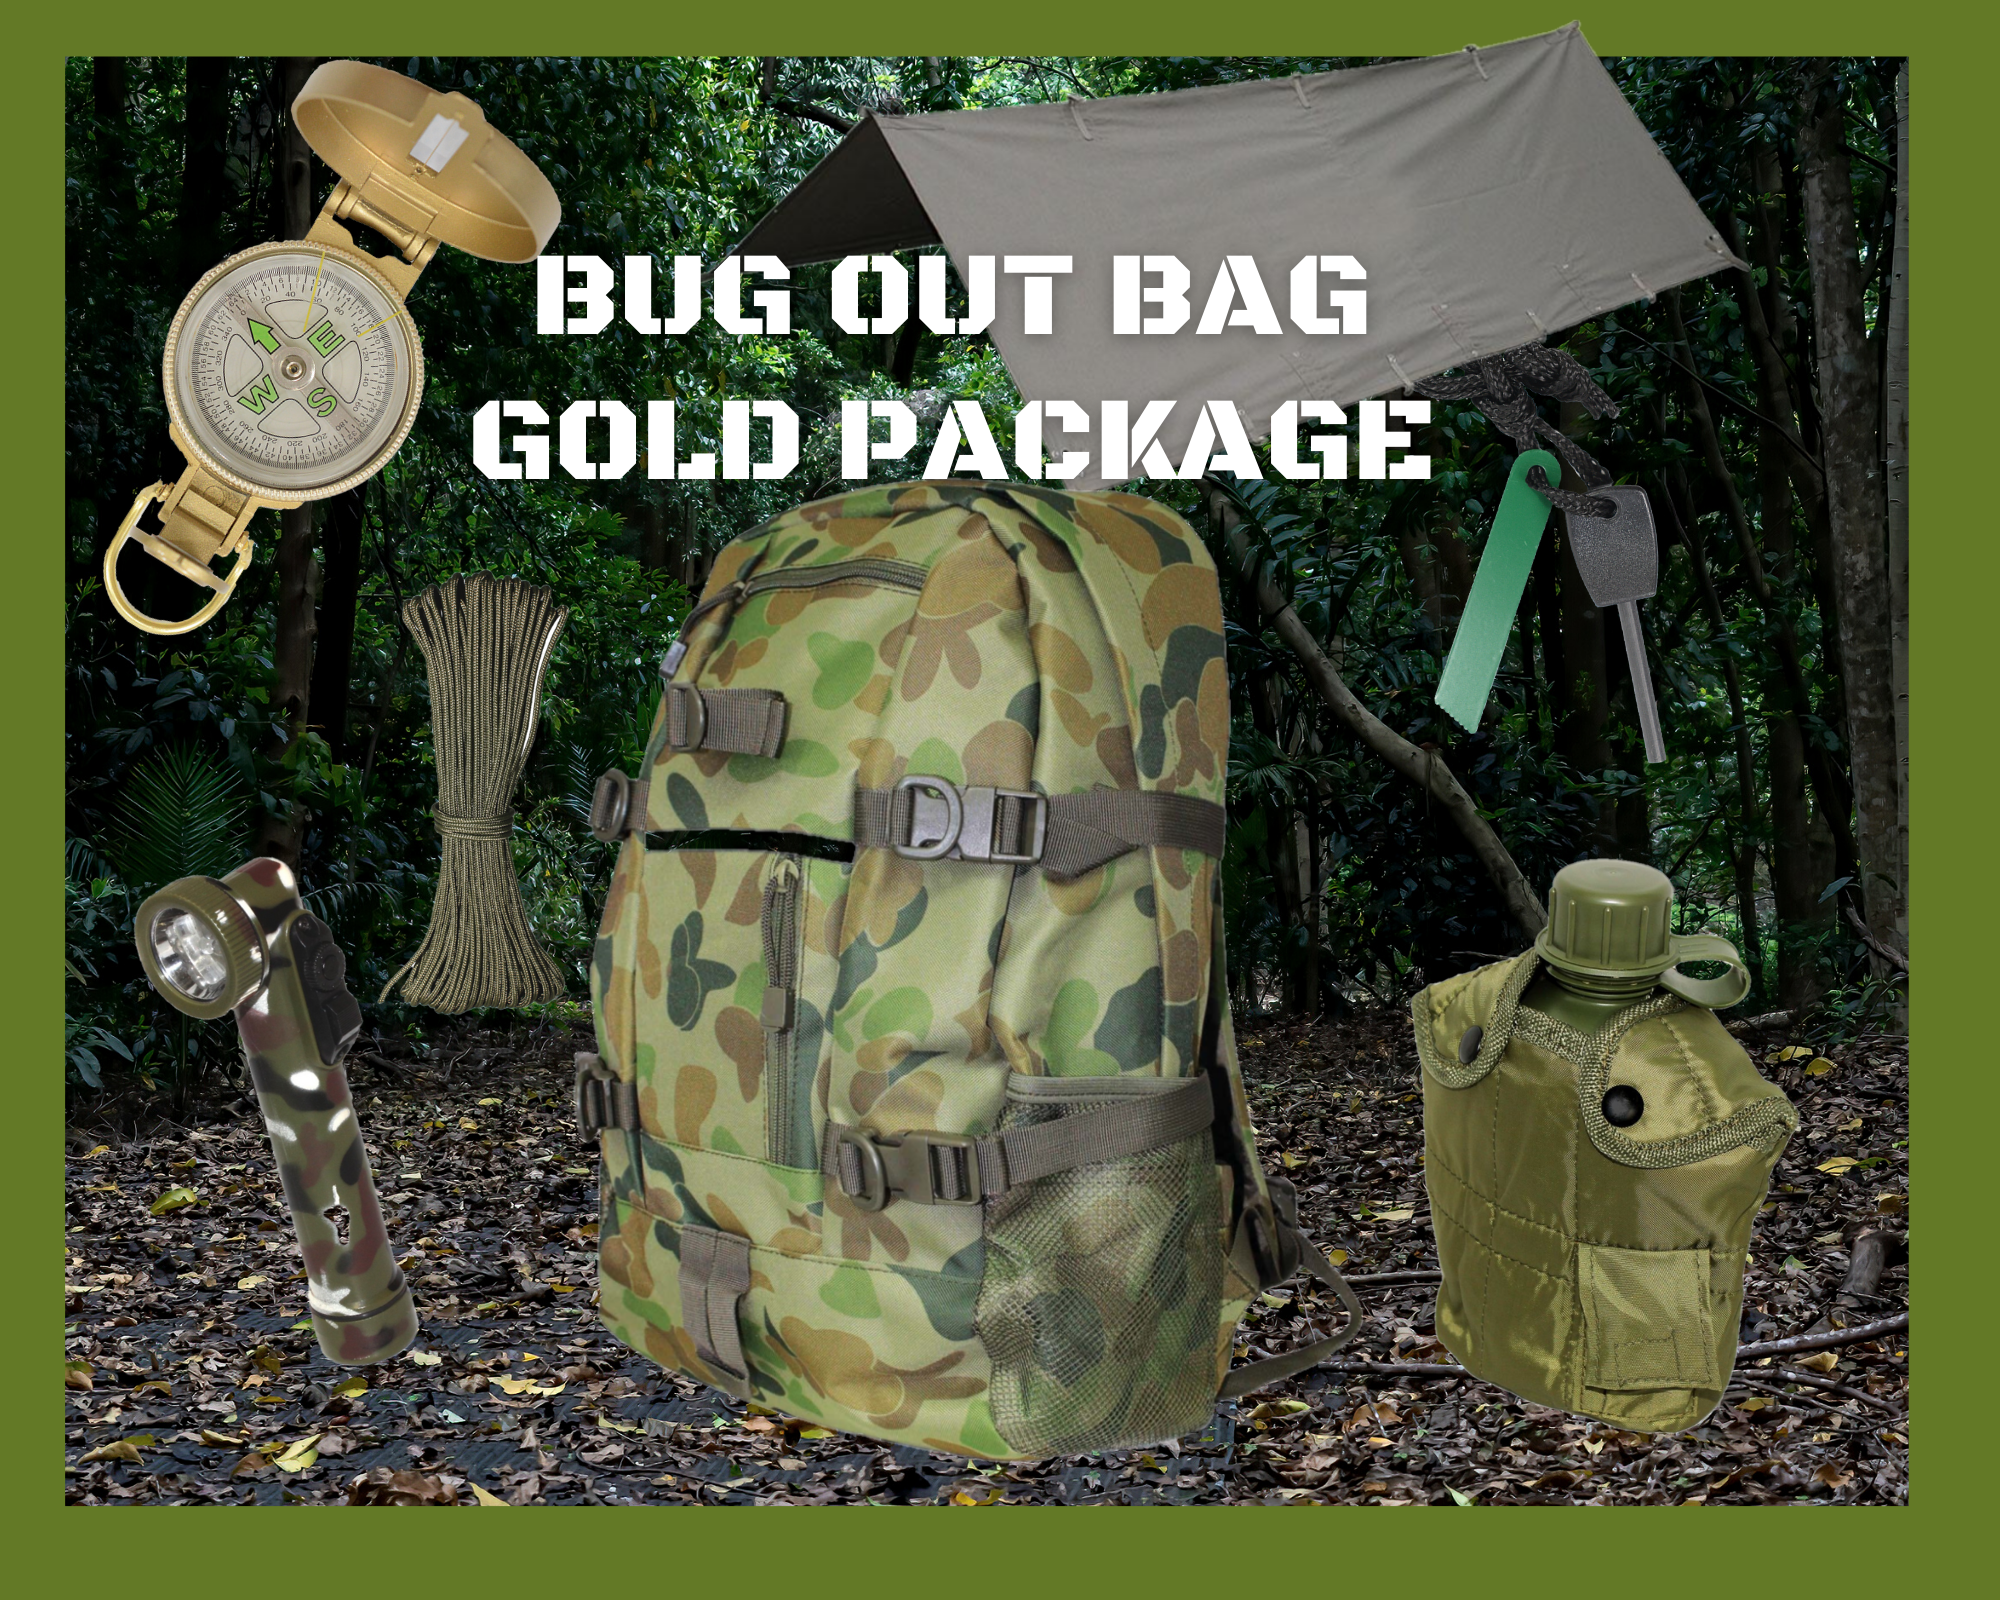 Bug Out Bag Gold Package, Grab Bag, Preppers Bag – The Outdoor Gear Co.